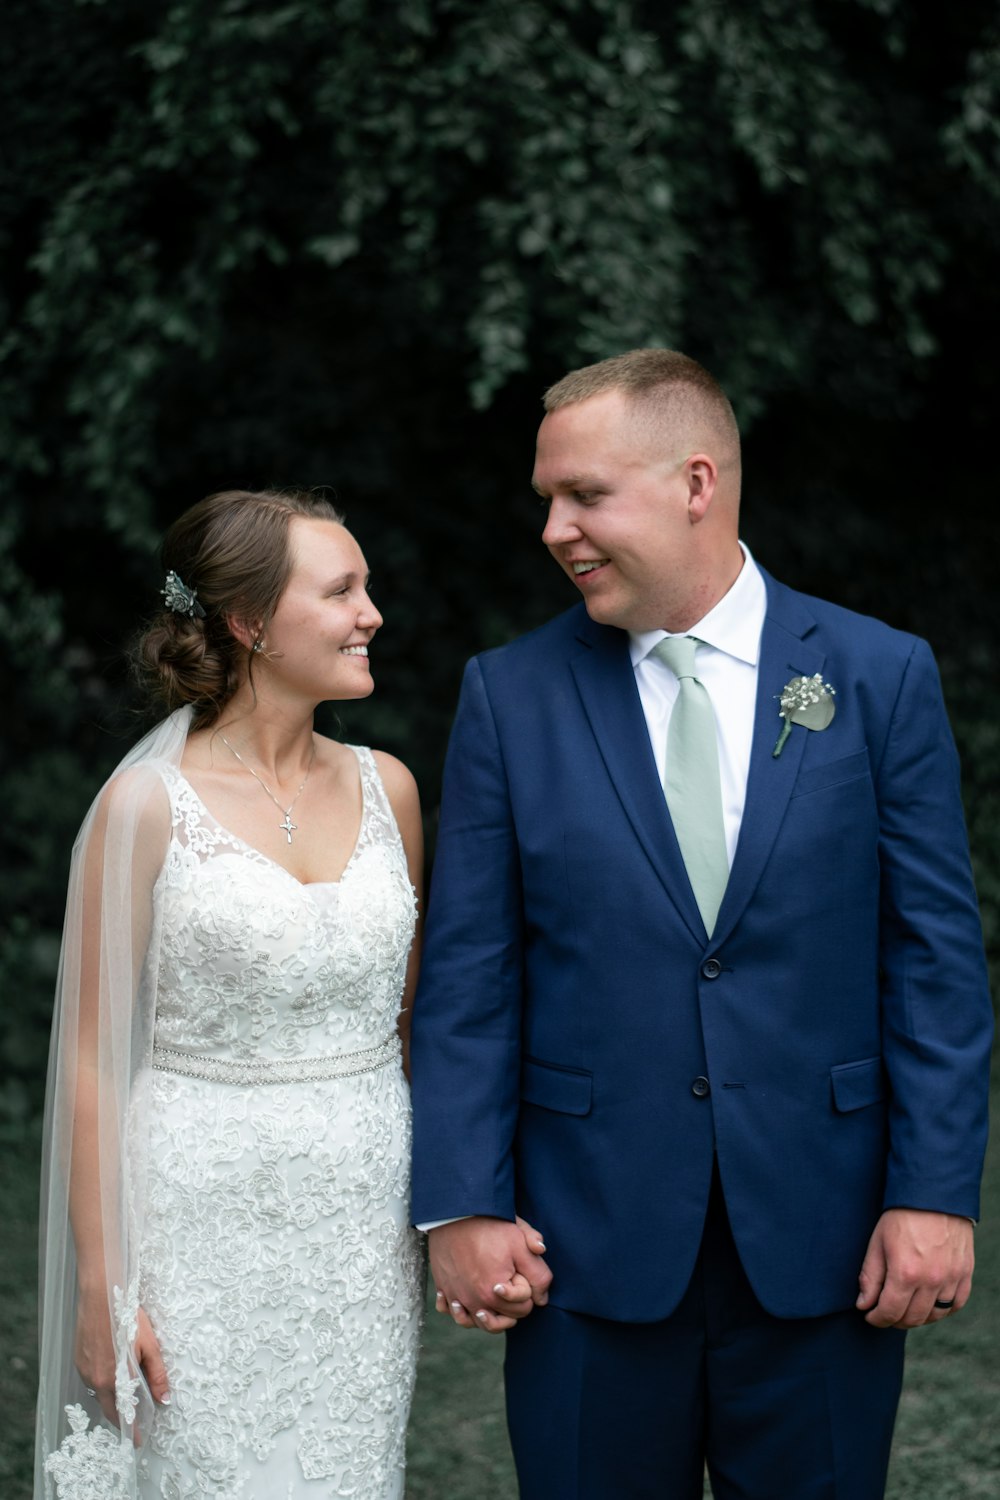 man in blue suit jacket and woman in white floral wedding dress